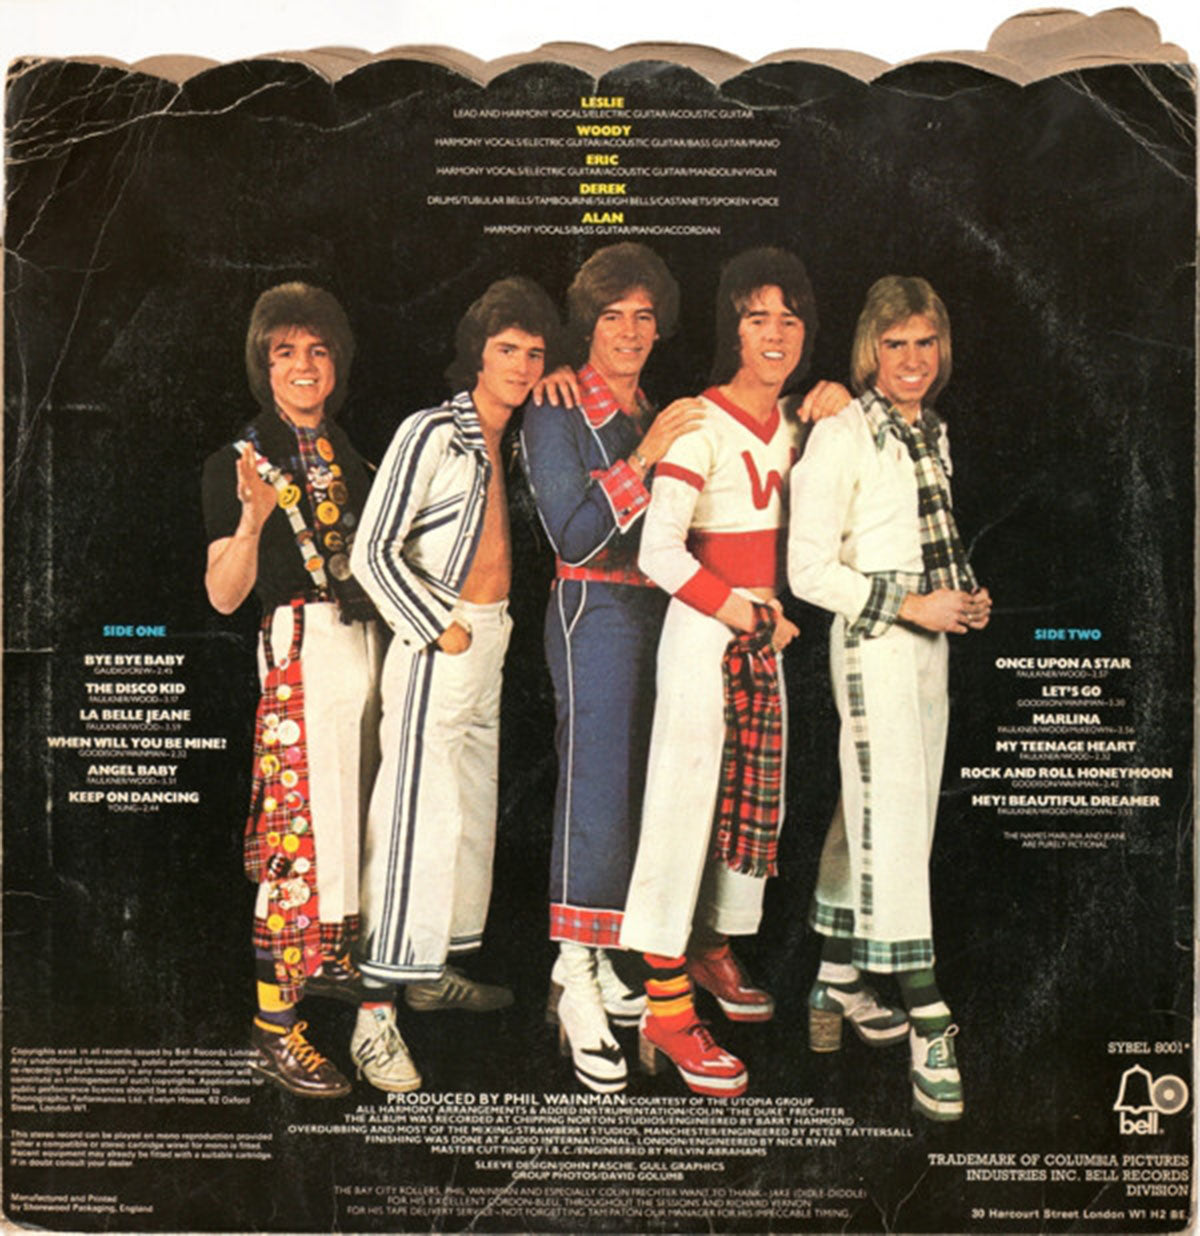 Bay City Rollers – Once Upon A Star - UK Pressing